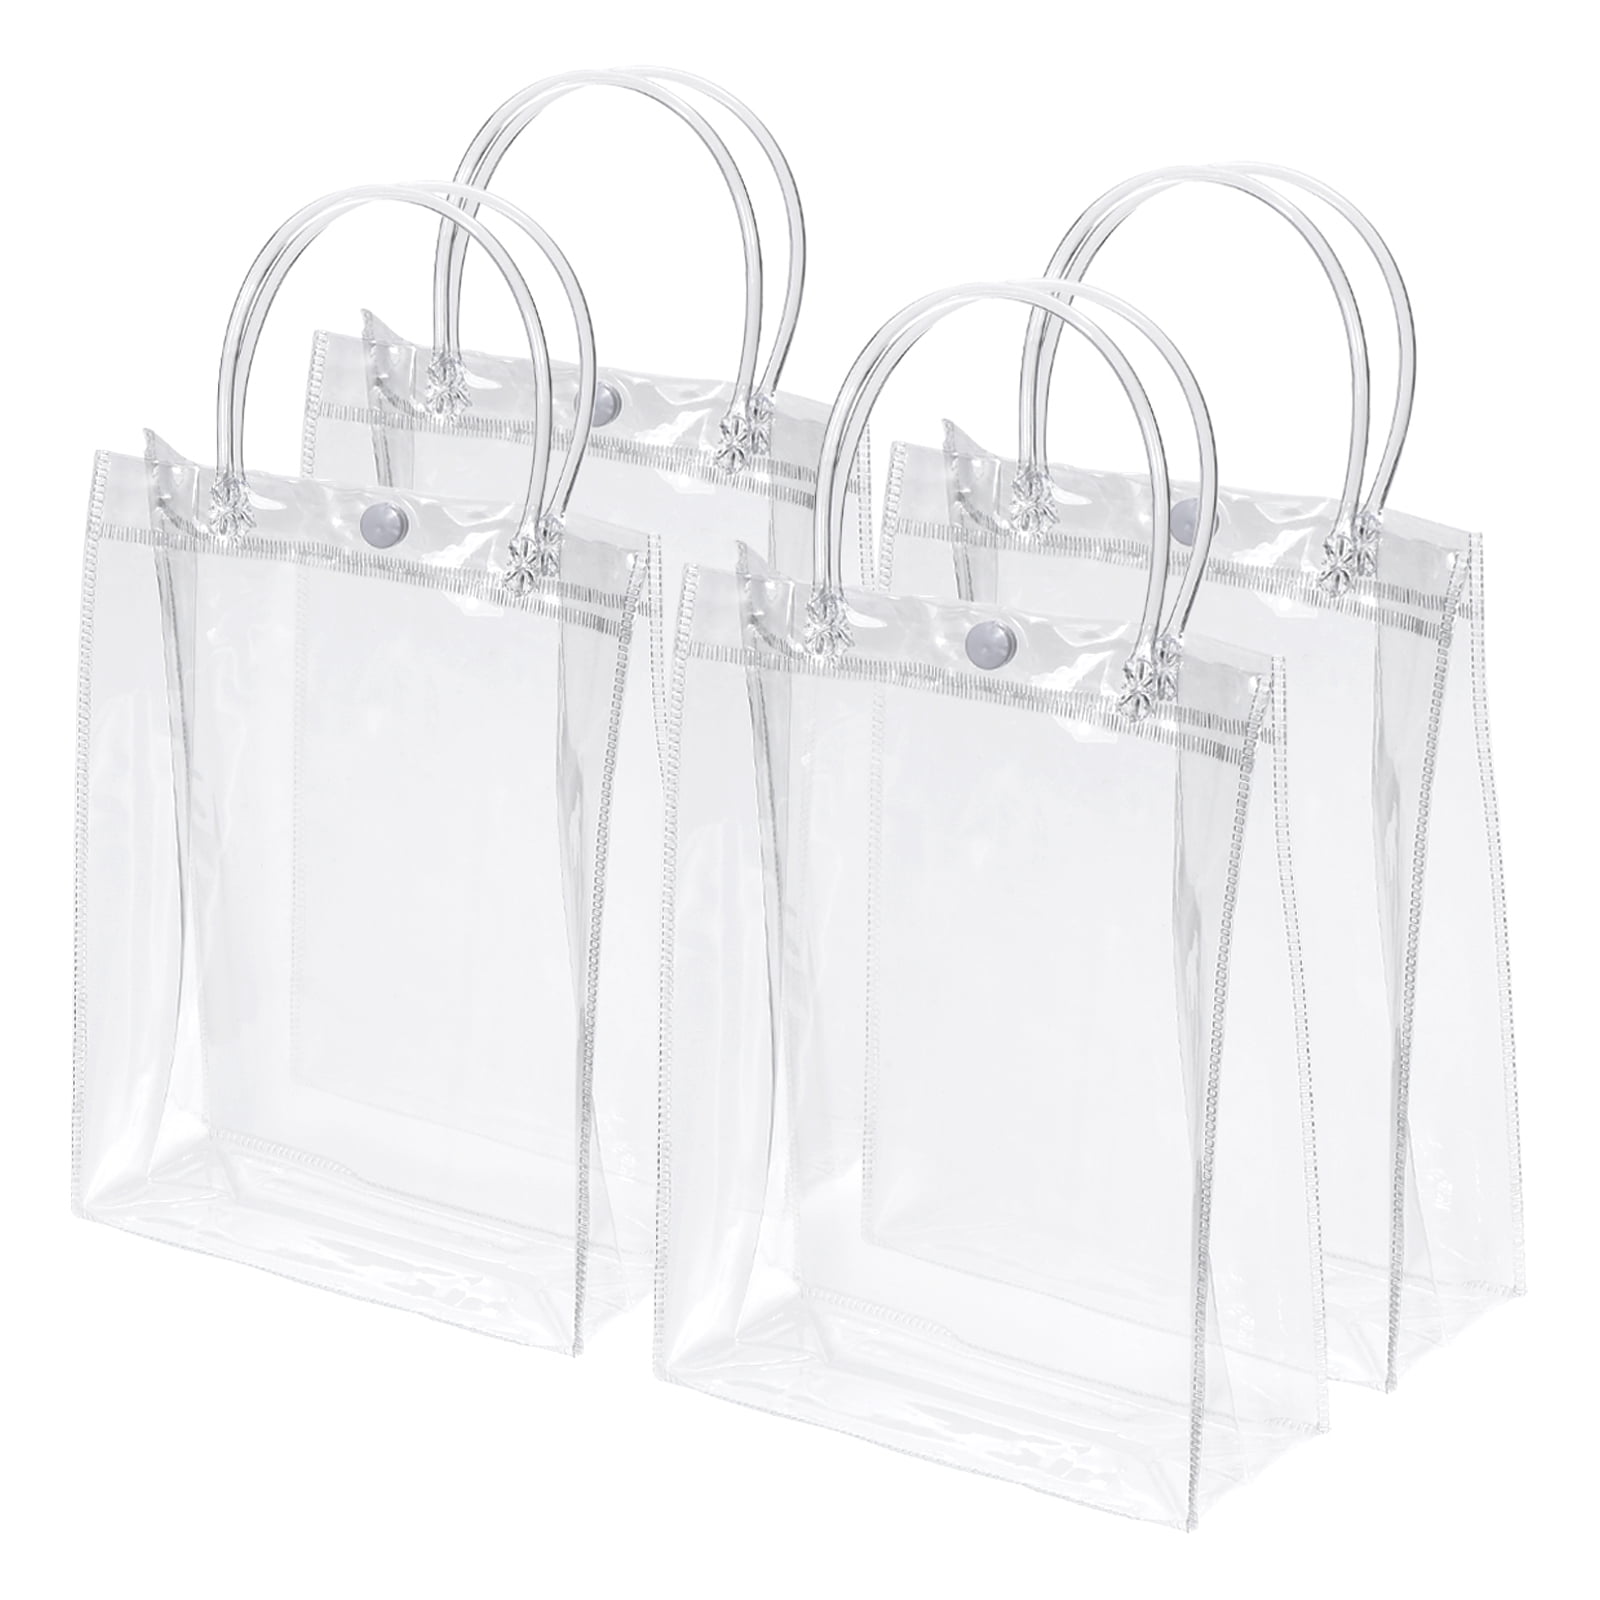 Uxcell Clear PVC Gift Bags 9x6.7x2.8